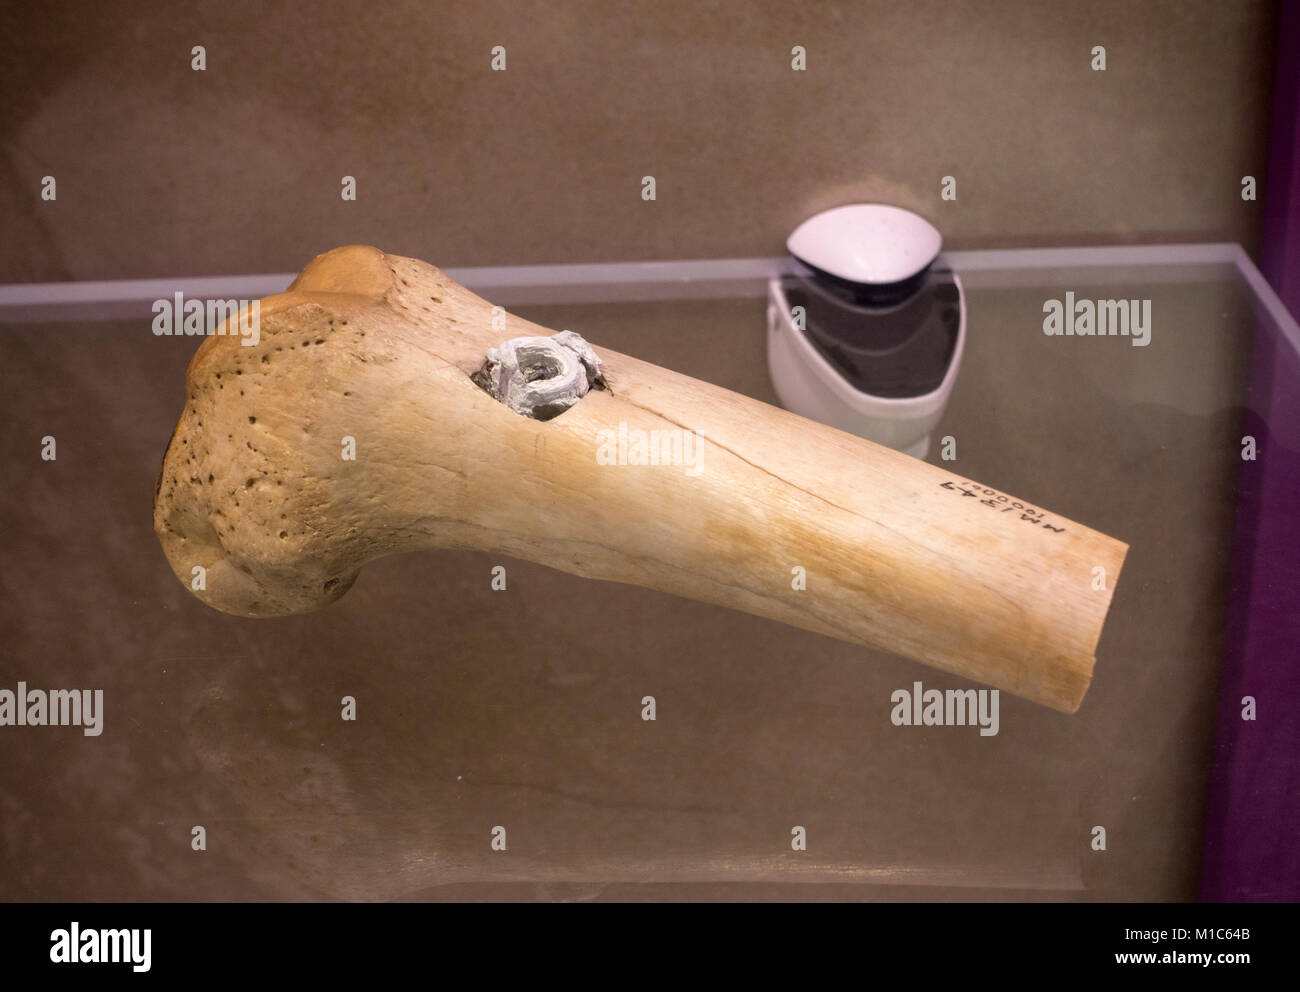 American Civil War human femur with the remains of a bullet on display in the National Museum of Health and Medicine, Silver Spring, MD, USA. Stock Photo